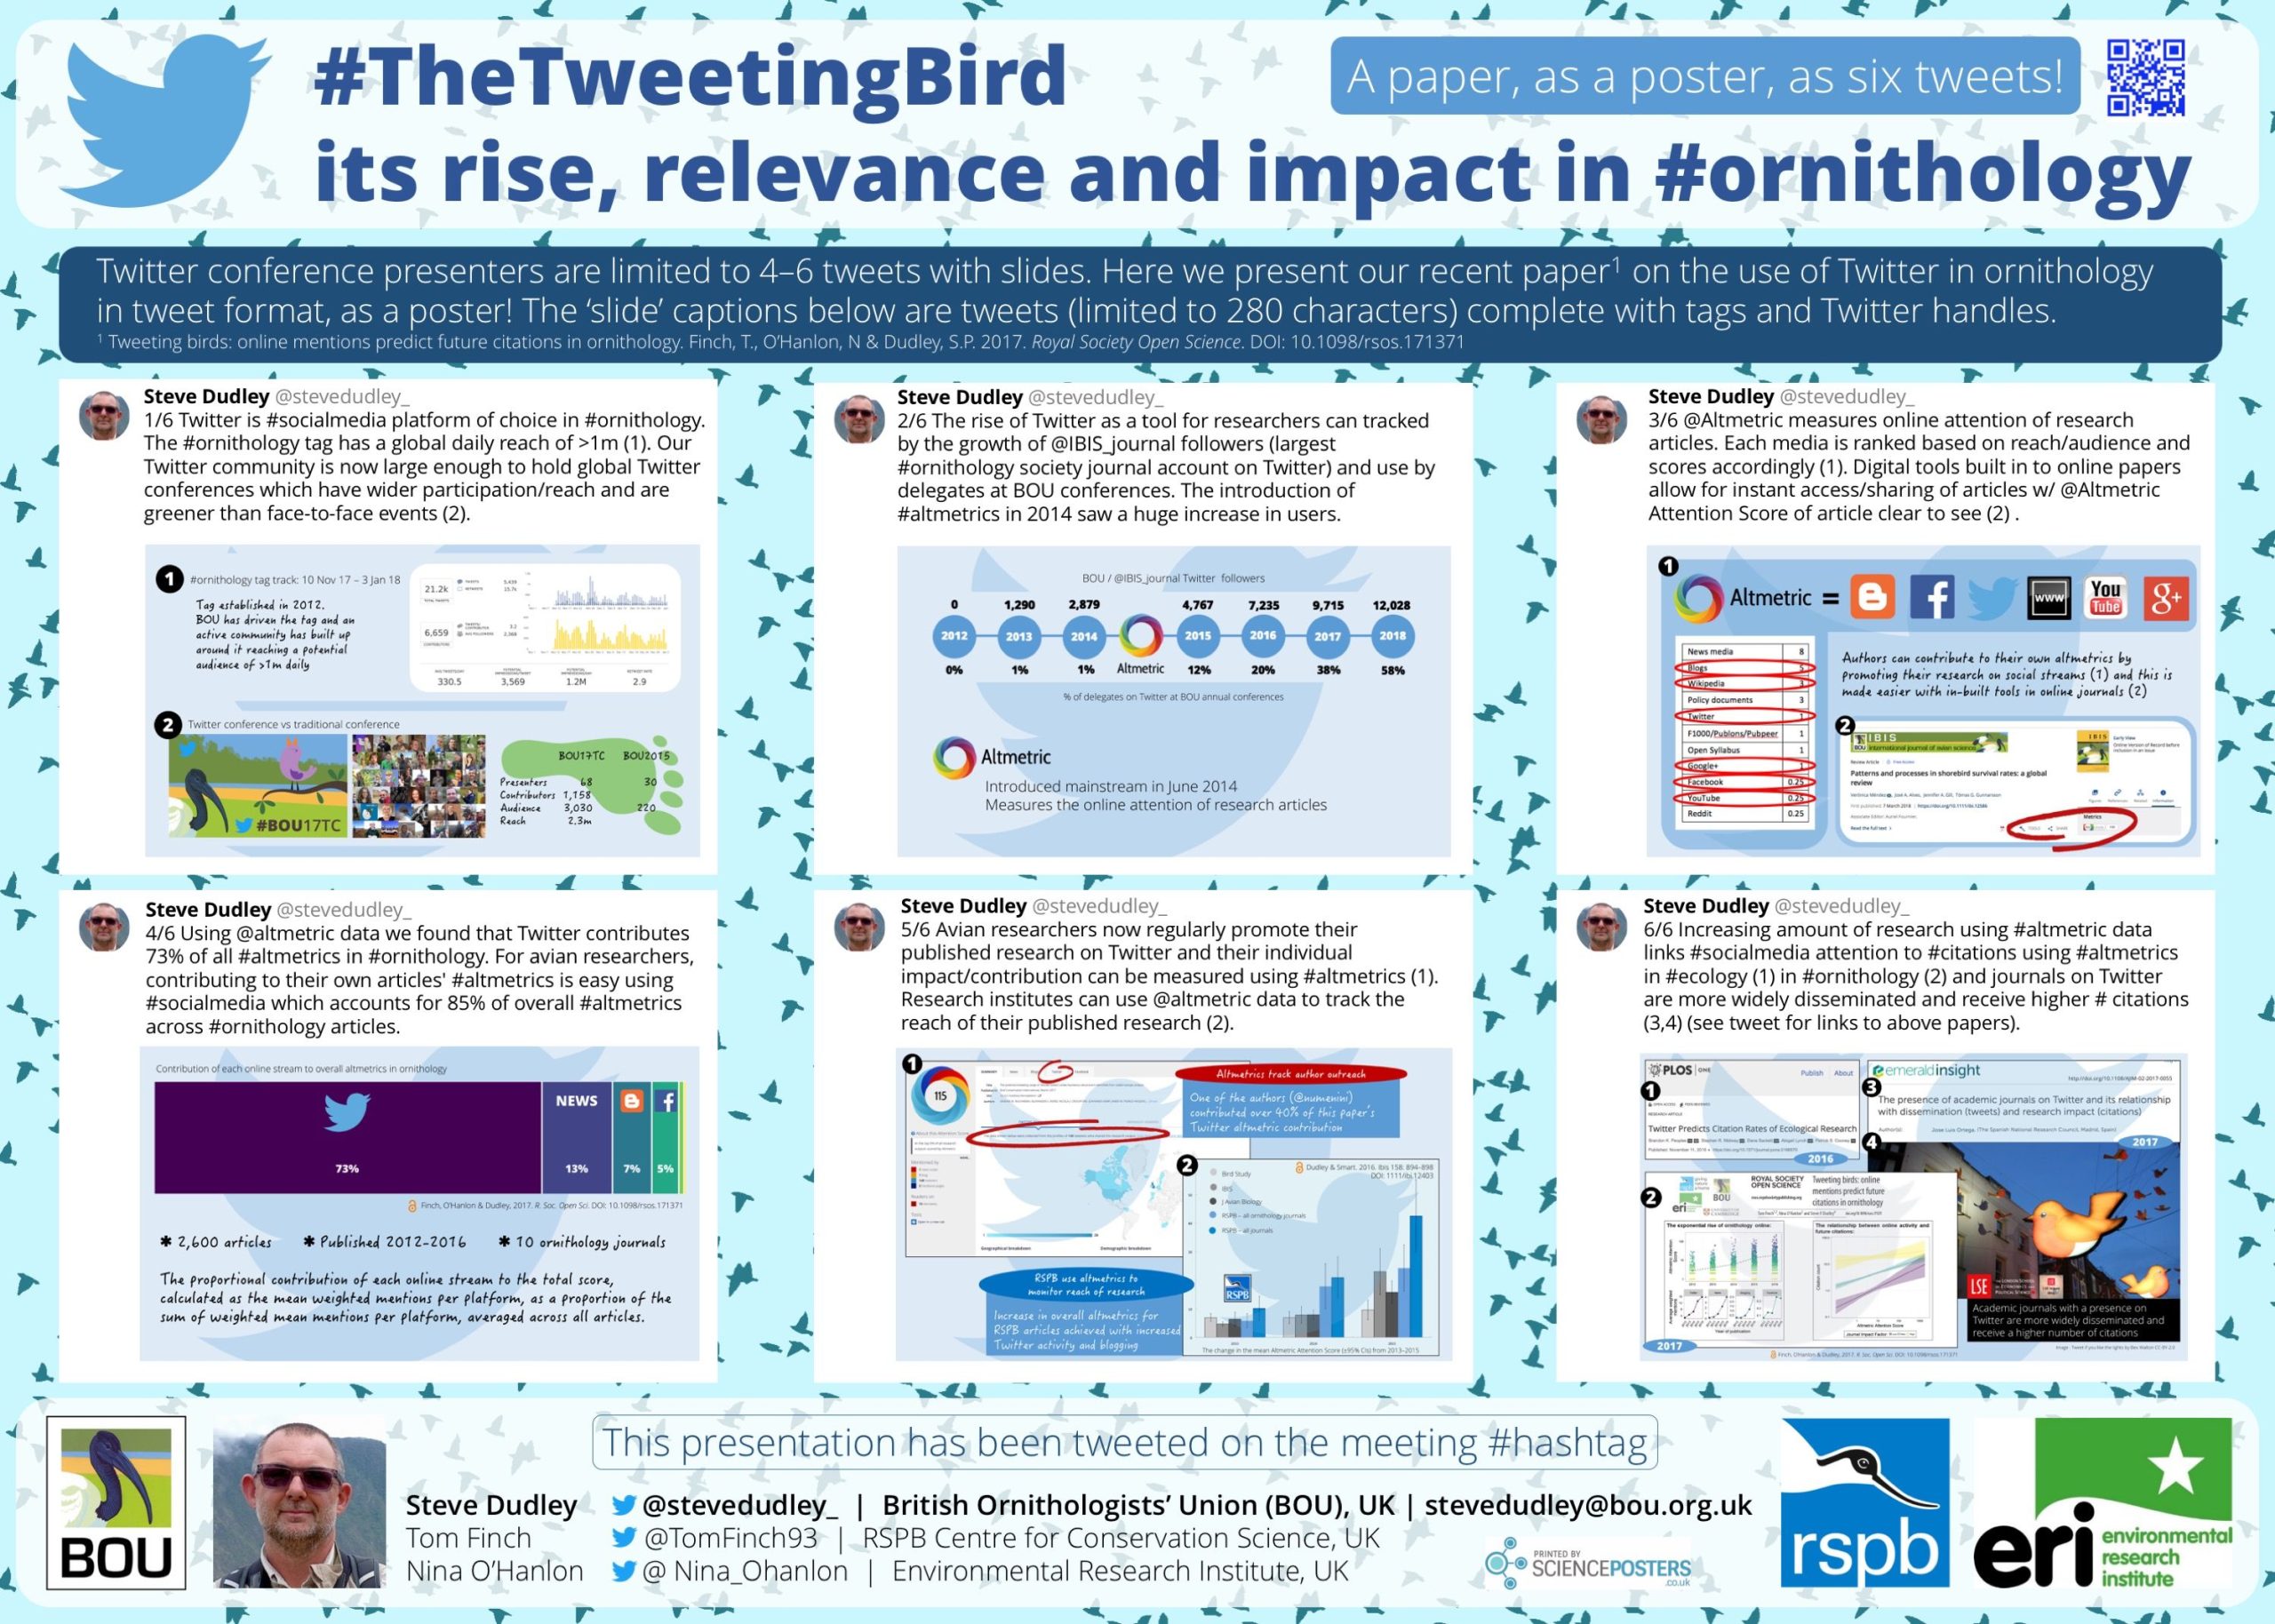 A paper on the use of twitter to promote ornithology, reproduced in tweets